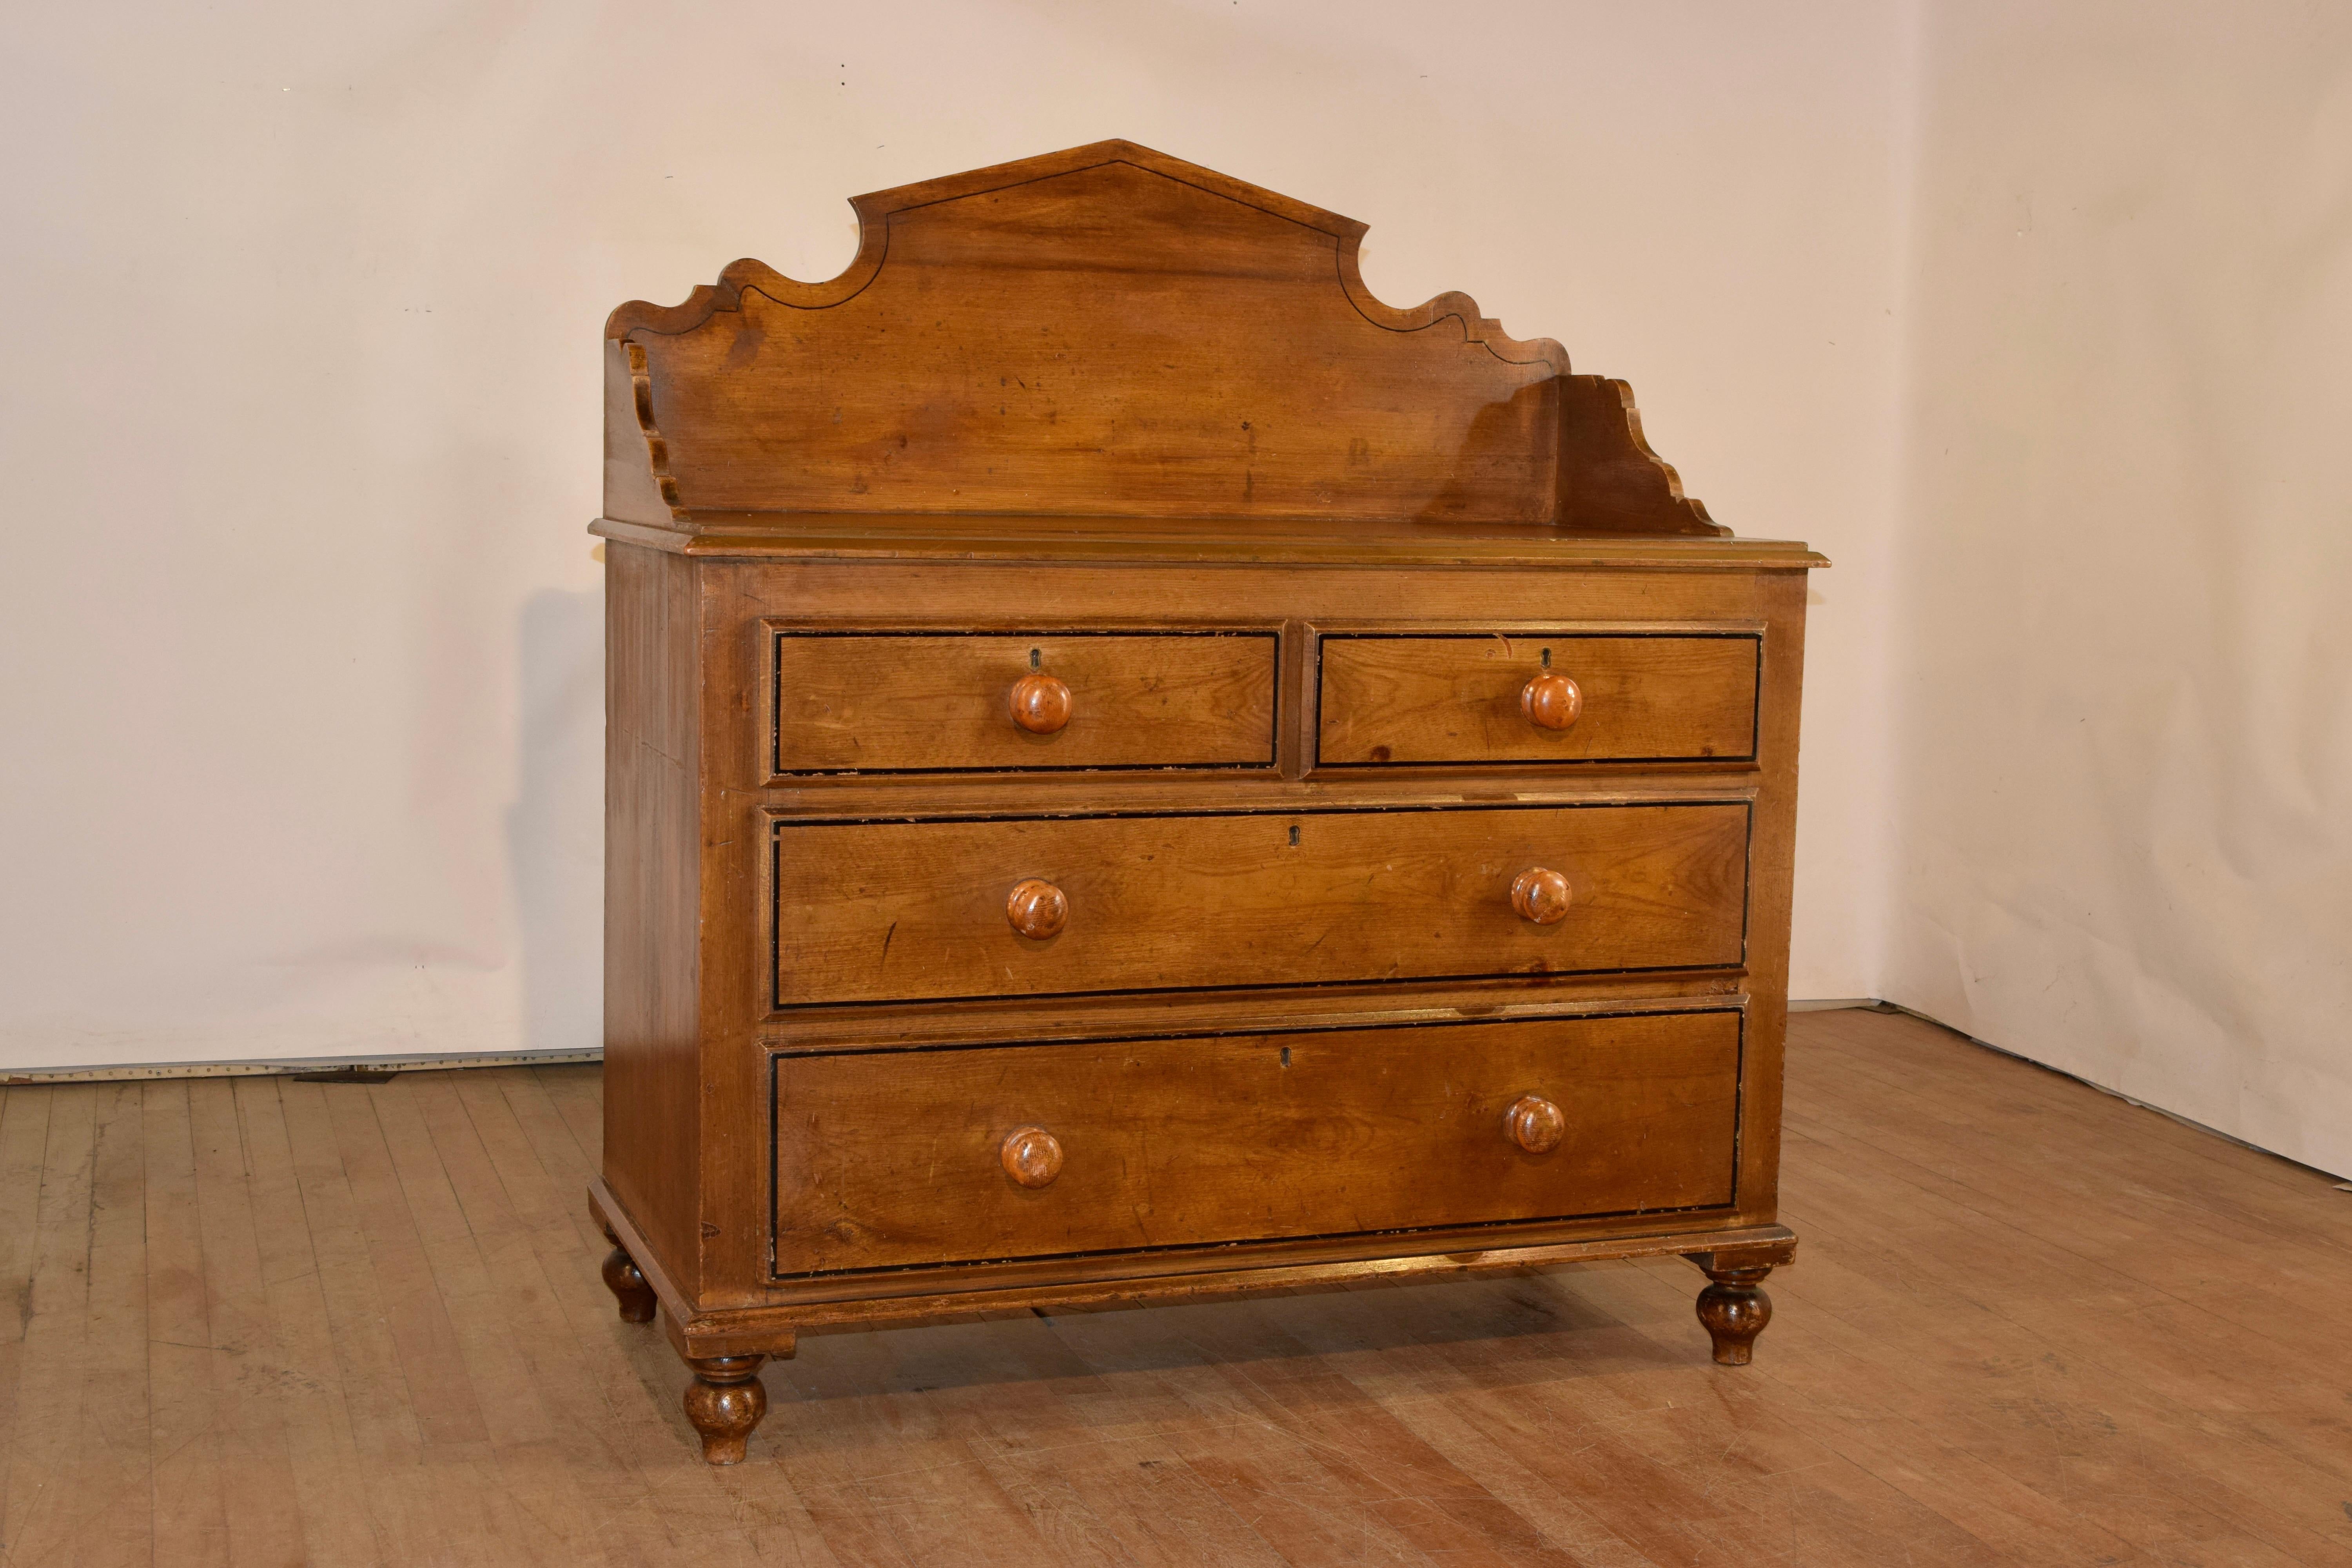 19th century oak washstand from England with a wonderful hand scalloped backsplash. The top of the chest measures 32 inches in height, and has a beveled edge, following down to two over two drawers, all with painted banding around the drawers for